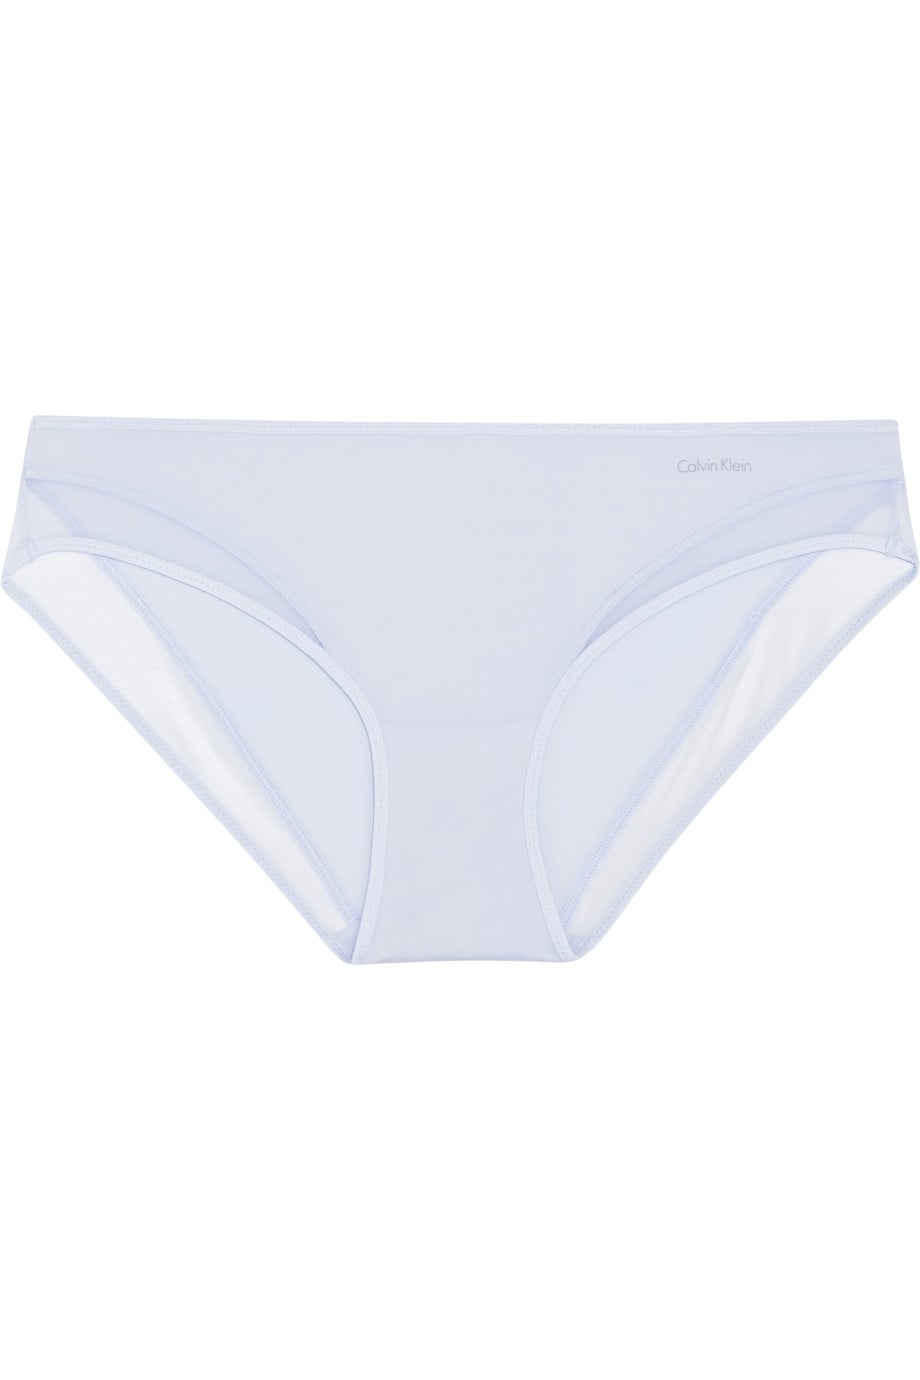 Calvin Klein Naked Touch Underwear | 16 Summer Panties So Comfortable You  Might Not Want to Take Them Off | POPSUGAR Fashion Photo 13